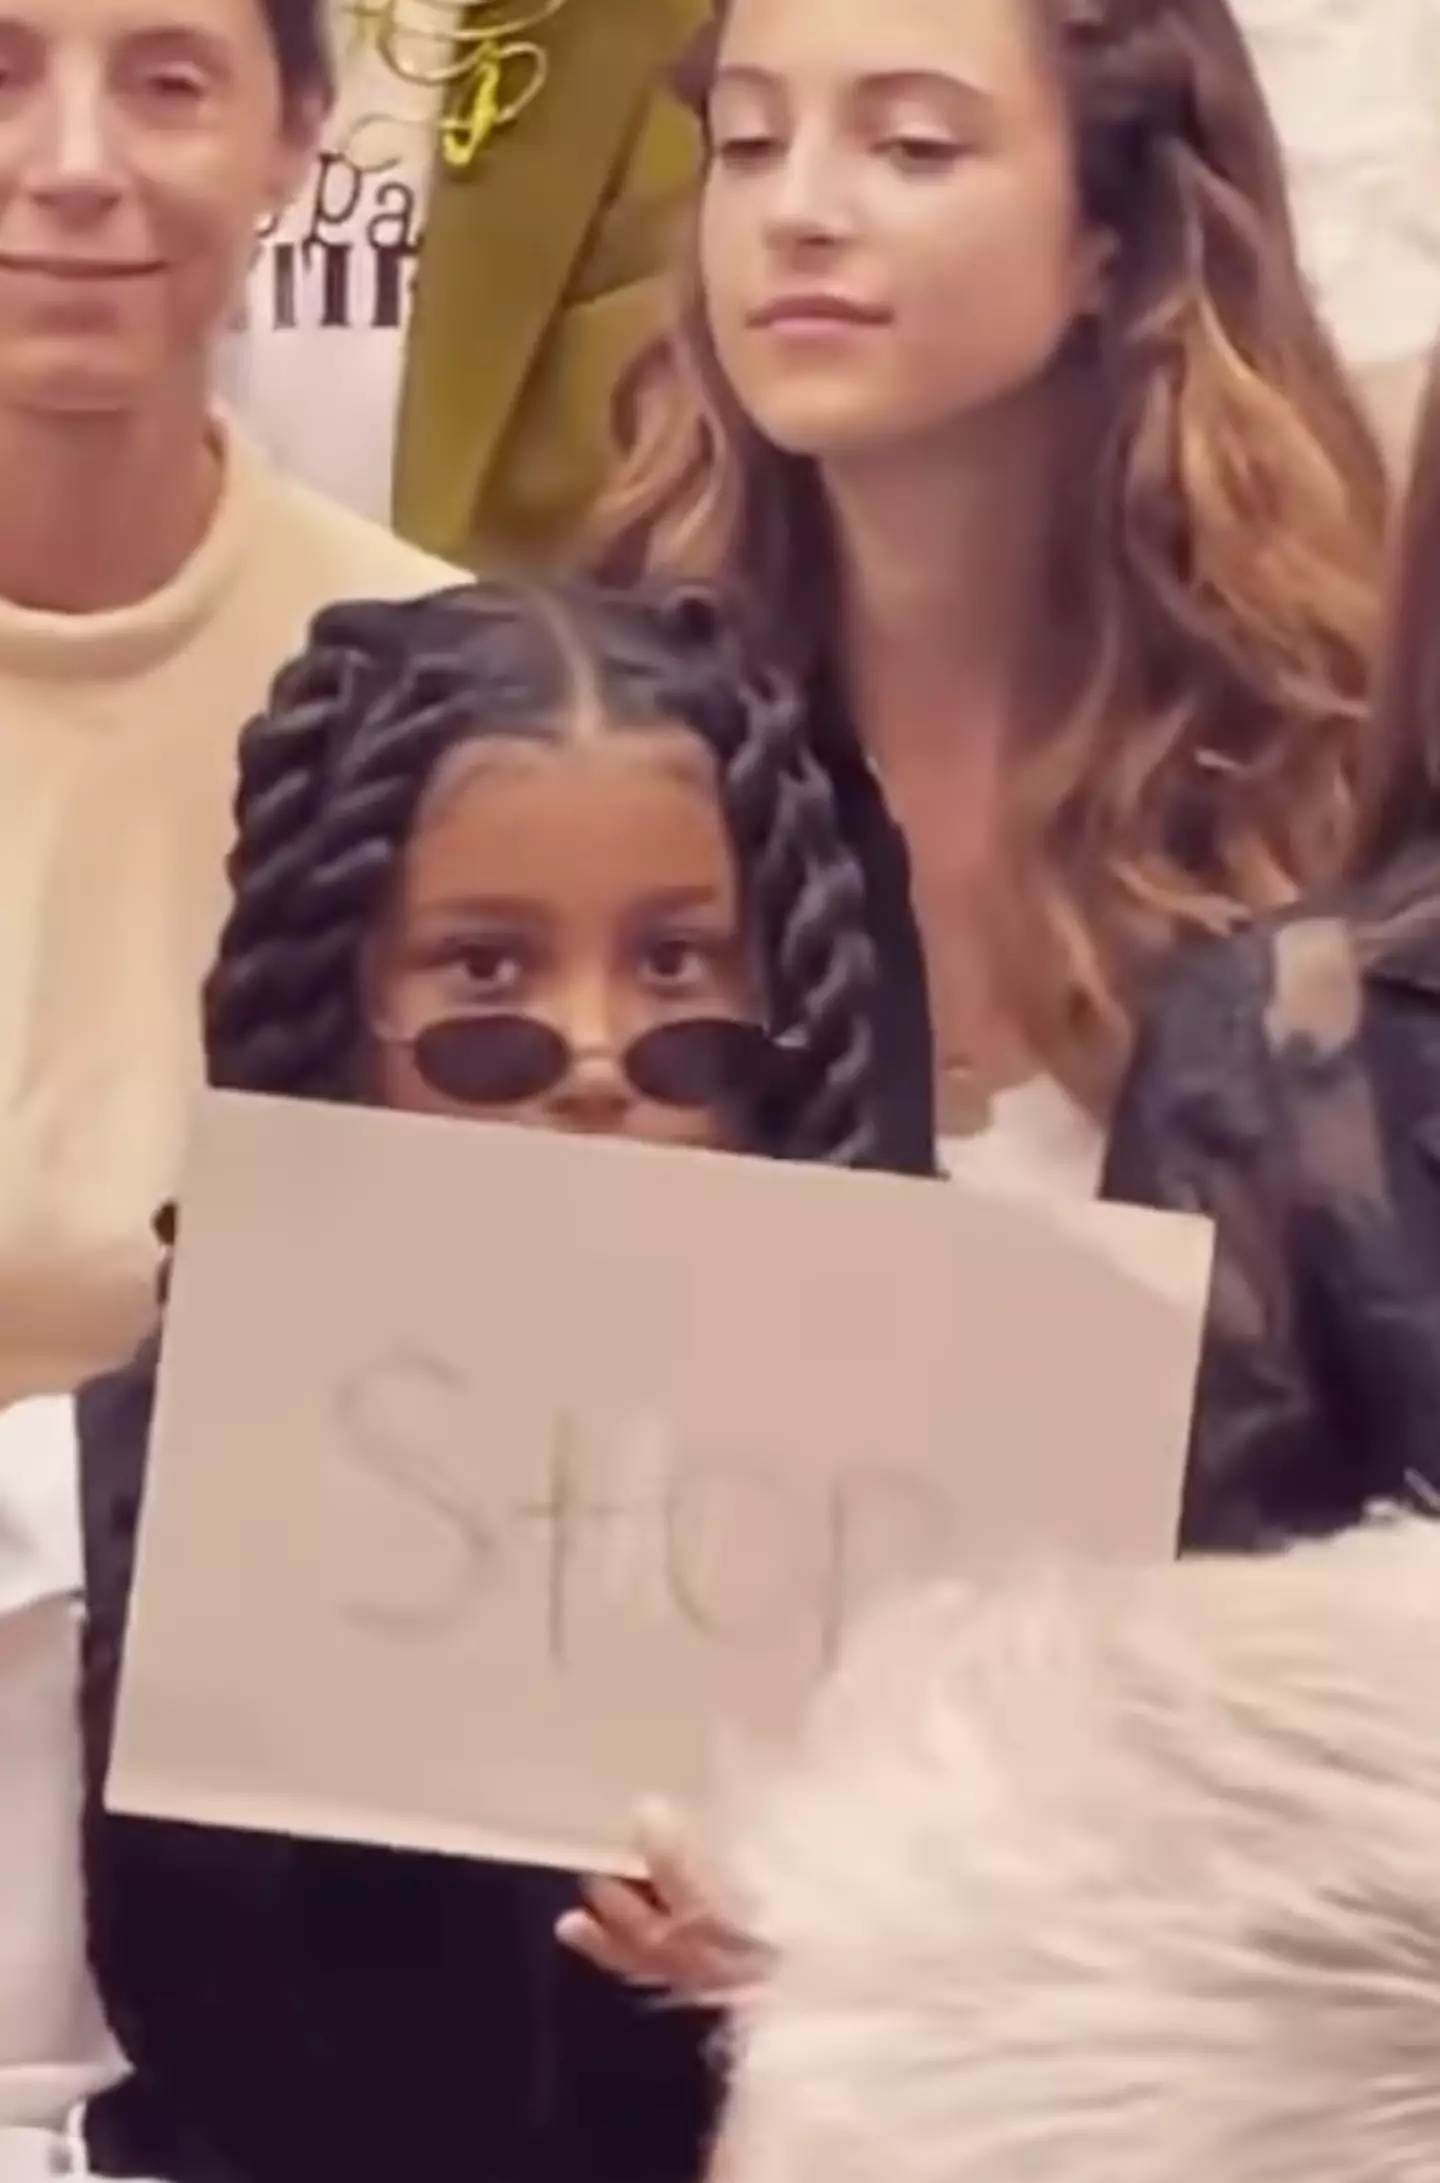 North held up a sign that read ‘stop’ at the Jean Paul Gaultier Haute Couture show.